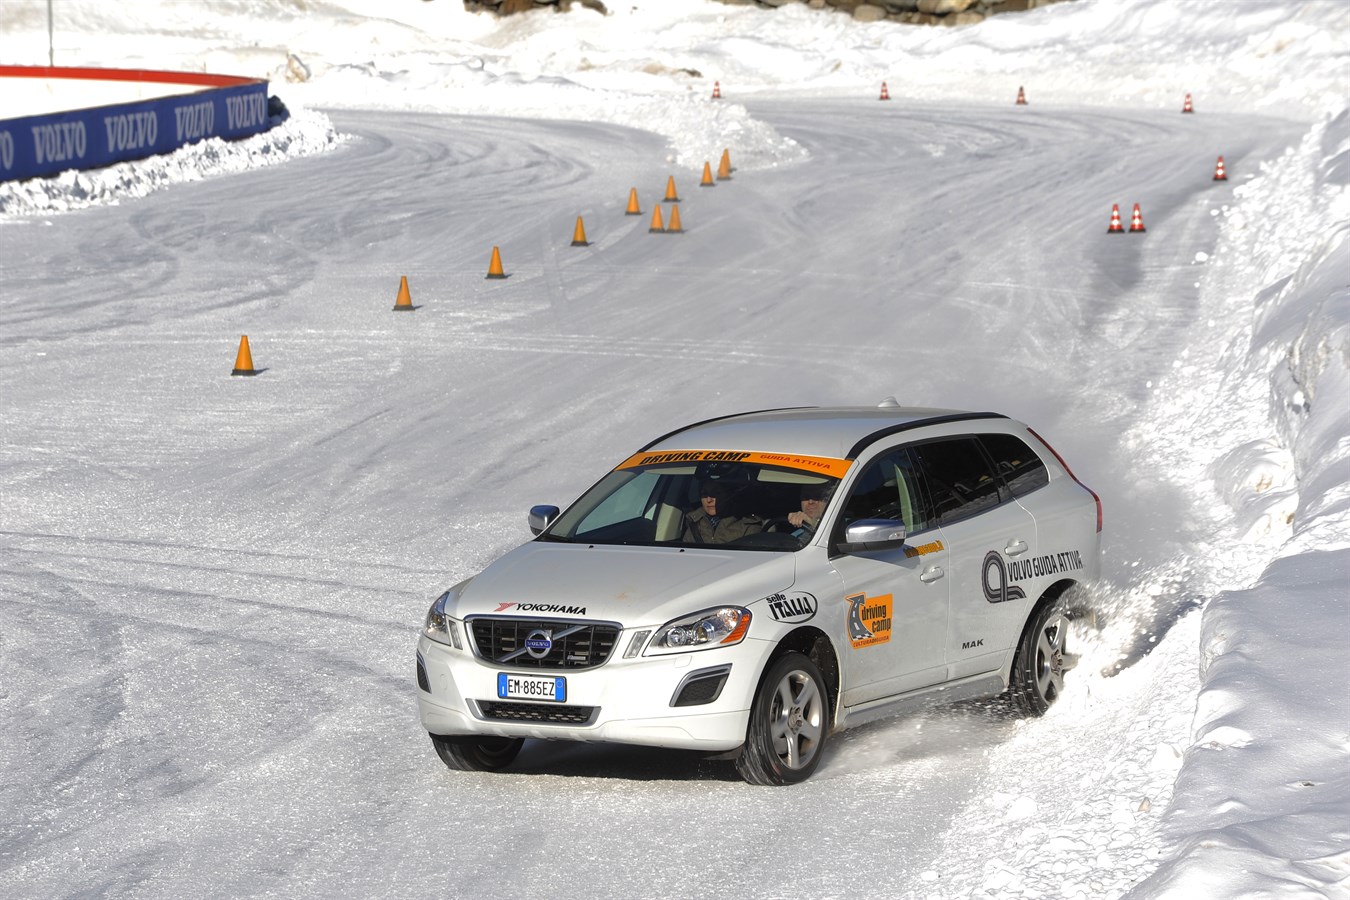 Volvo Driving Camp